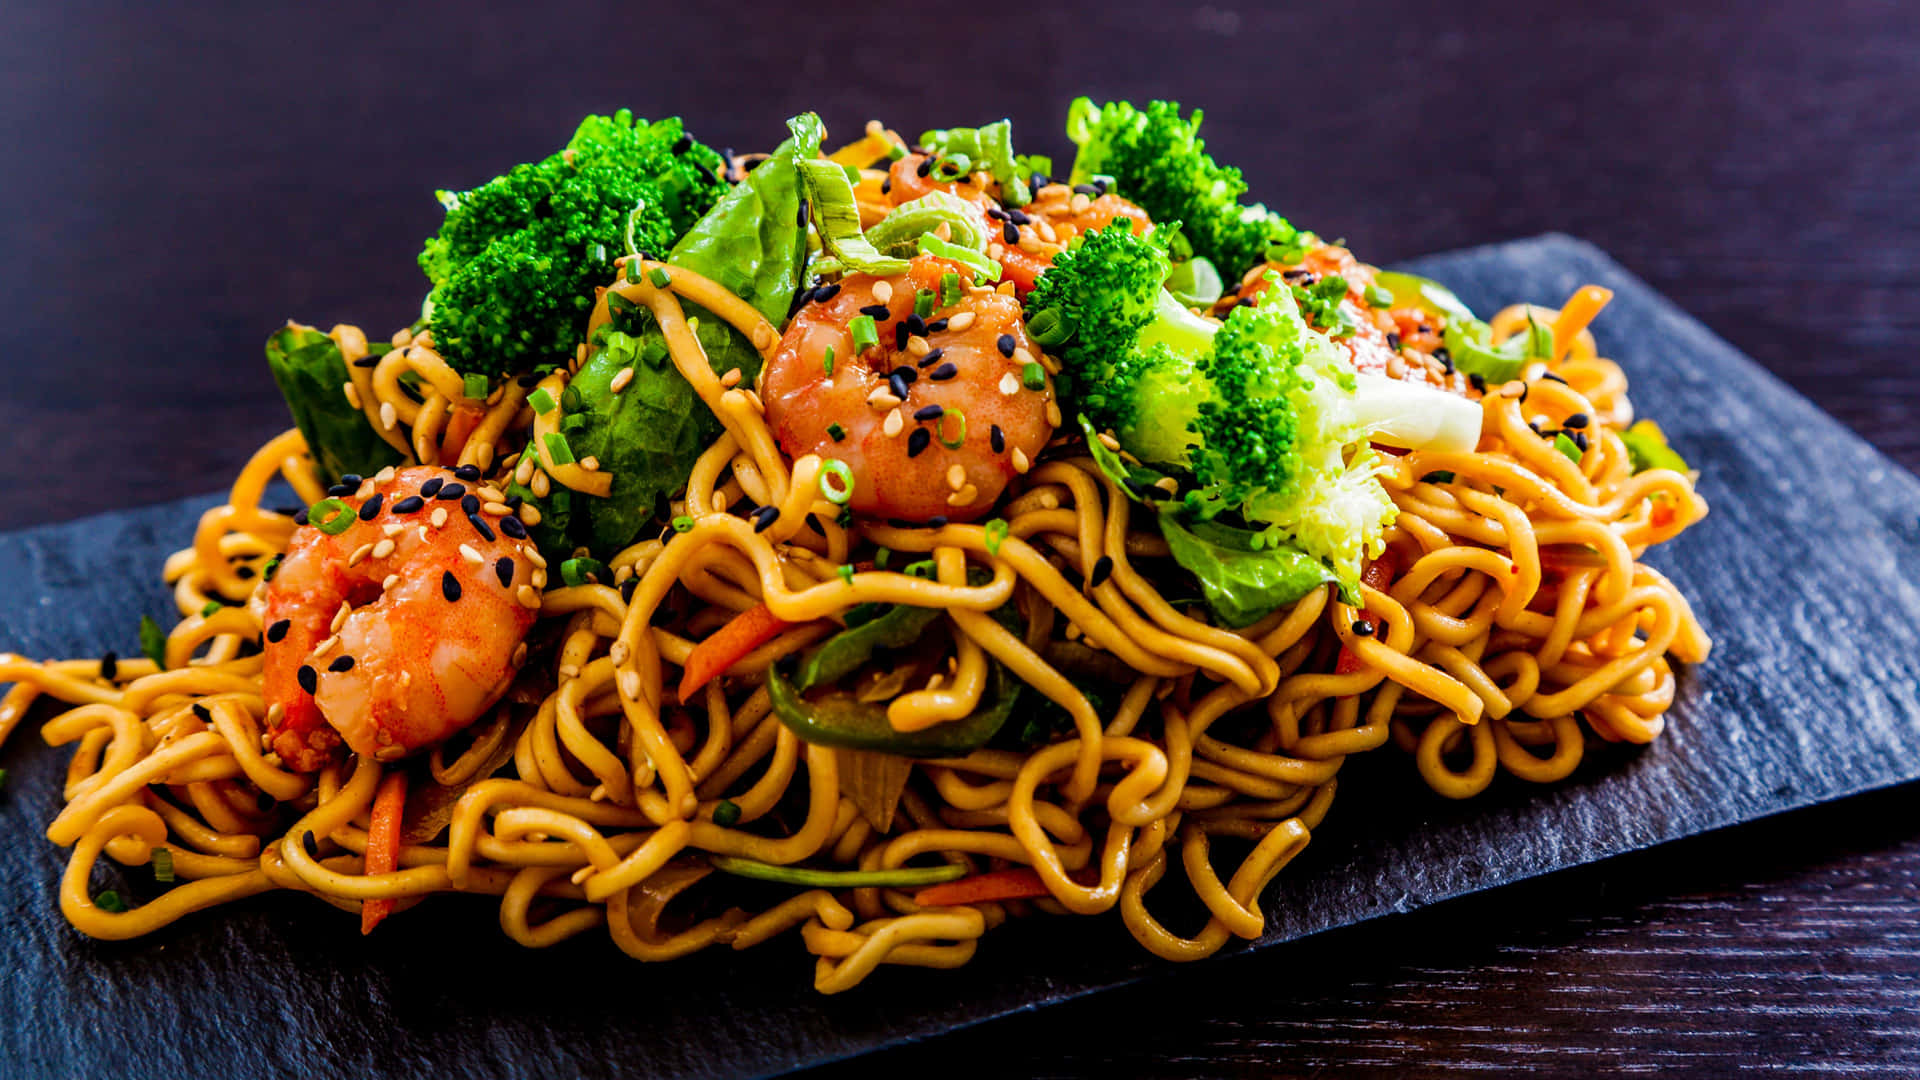 Deliciously cooked noodles with fresh vegetables and savory sauce